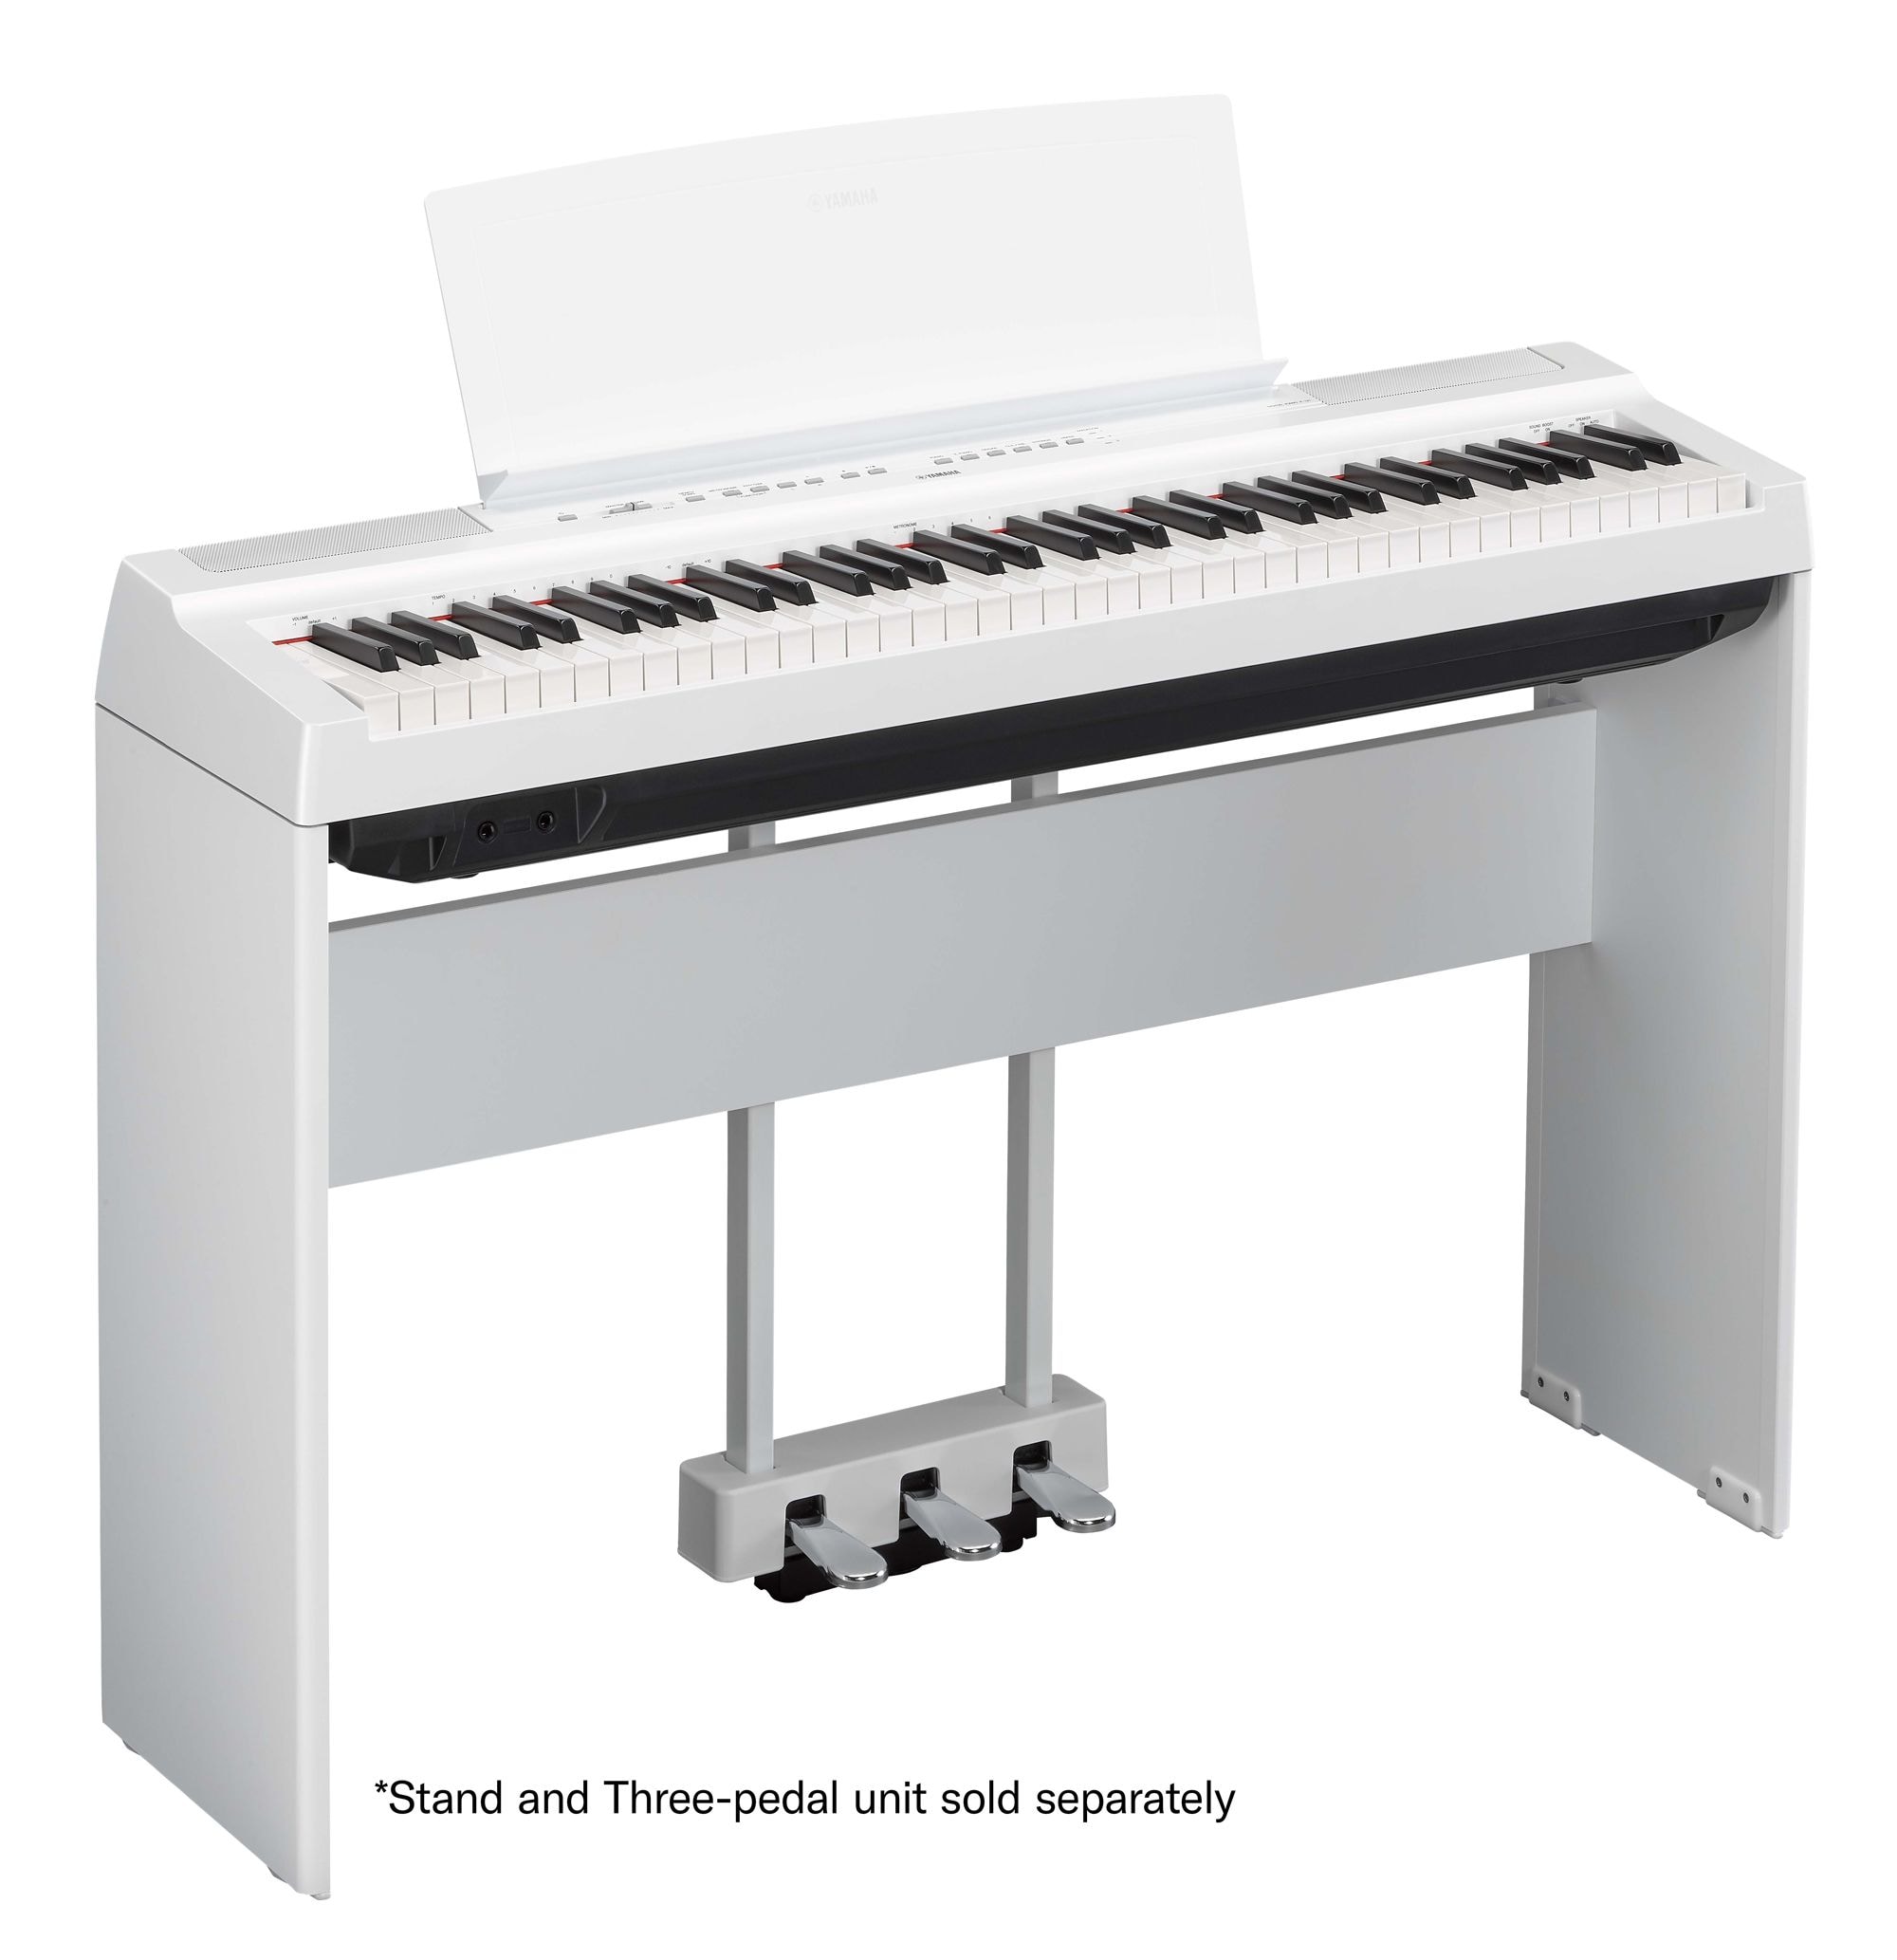 P-121 - Overview - Portables - Pianos - Musical Instruments 